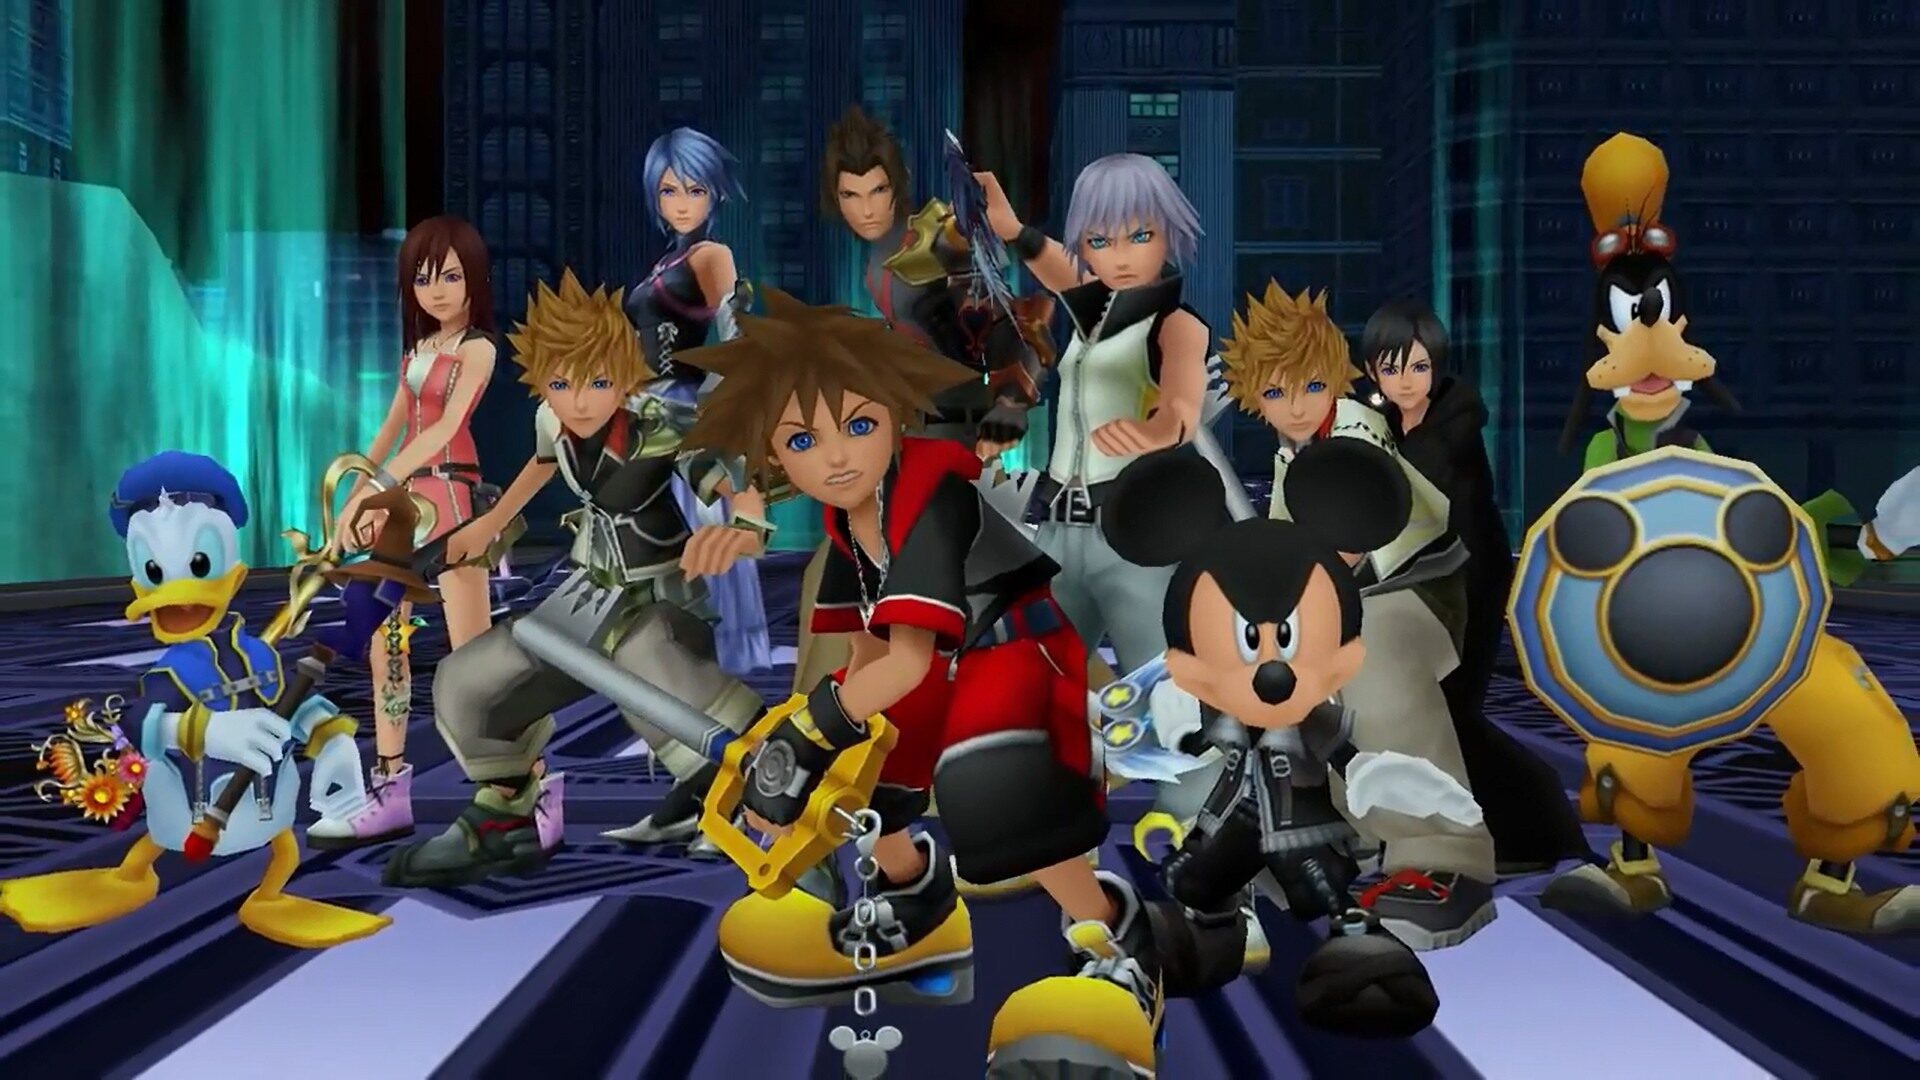 Kingdom Hearts HD 1.5 & 2.5 ReMIX Coming Soon to the PlayStation 4